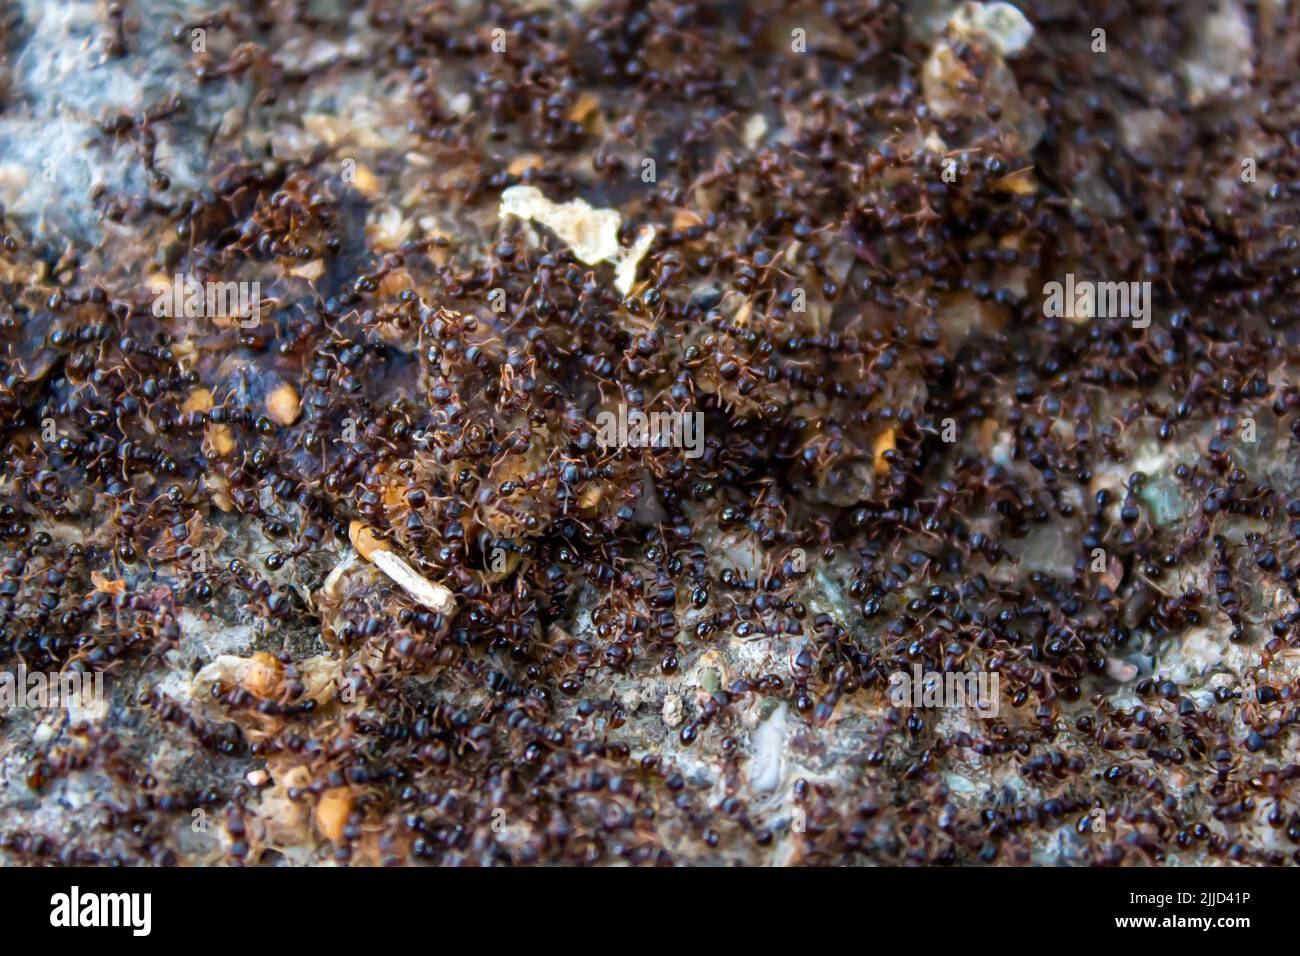 A large swarm of ants. Lots of ants looking for food. Teamwork concept. Stock Photo